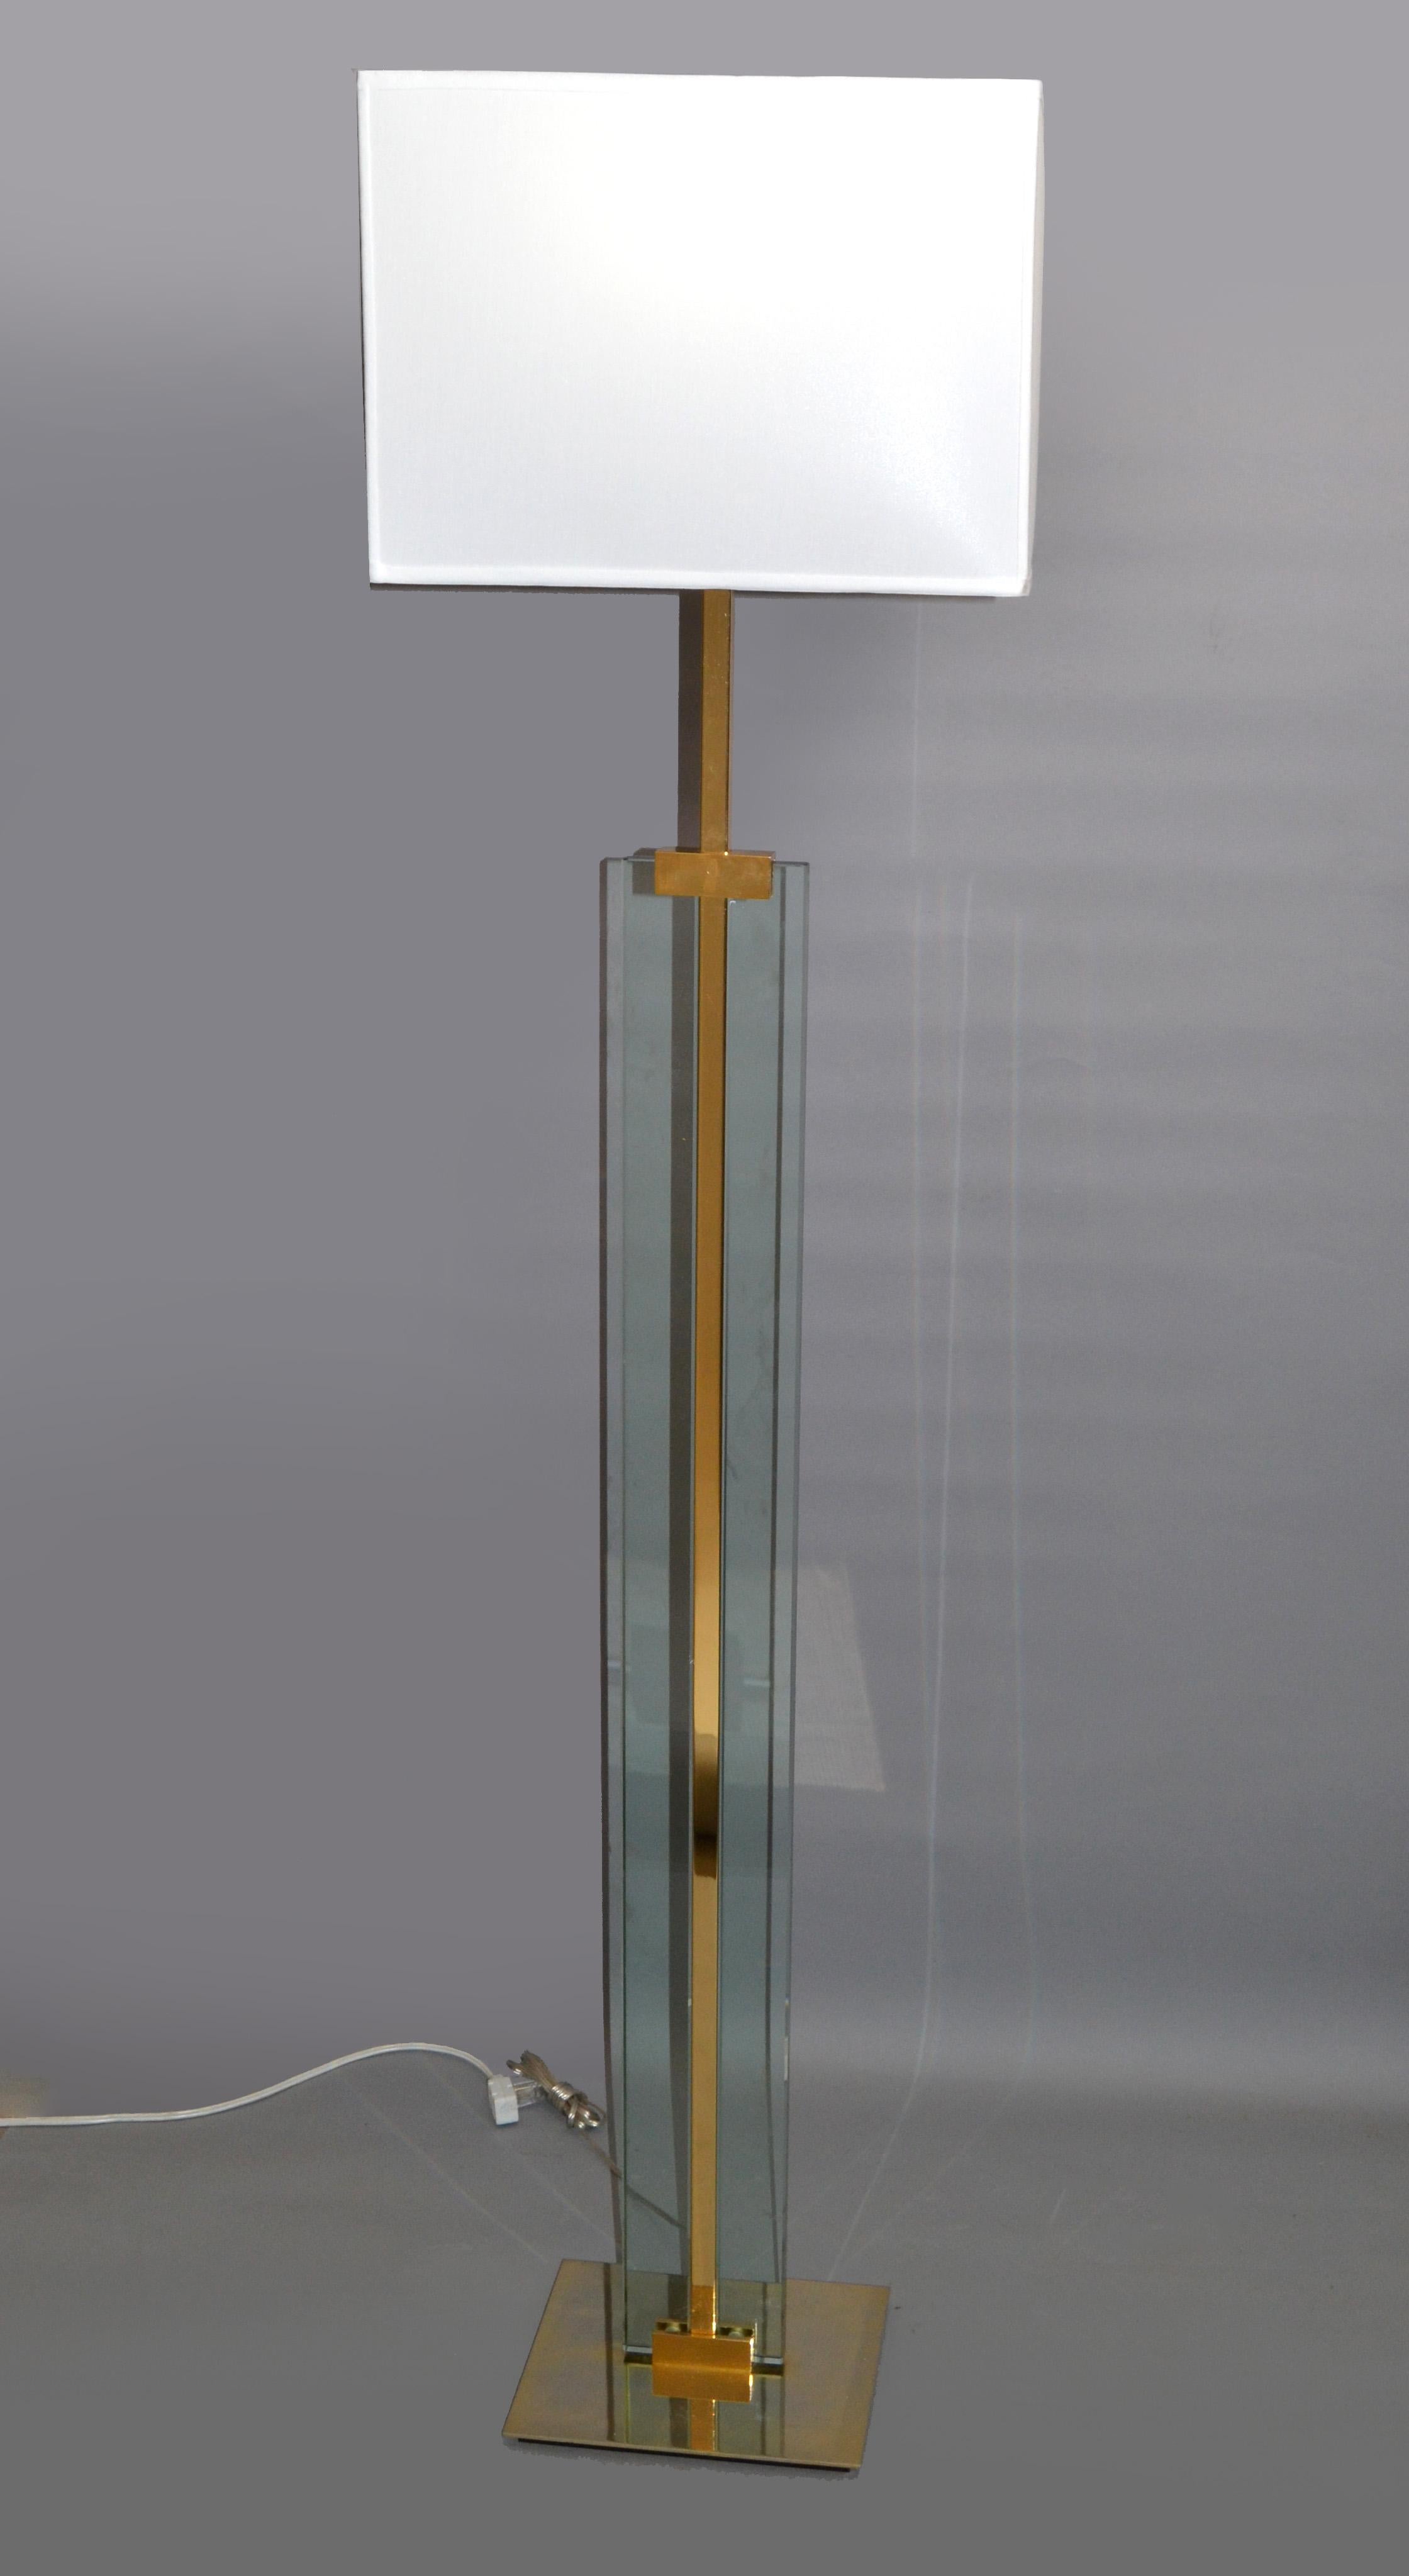 Original 1960s Fontana Arte Art glass floor lamp with polished brass base, stem and neck.
Heavy rectangular block of tinted beveled glass fastened by a polished brass shaft and comes with custom made rectangle fabric shade.
US rewiring and takes 1